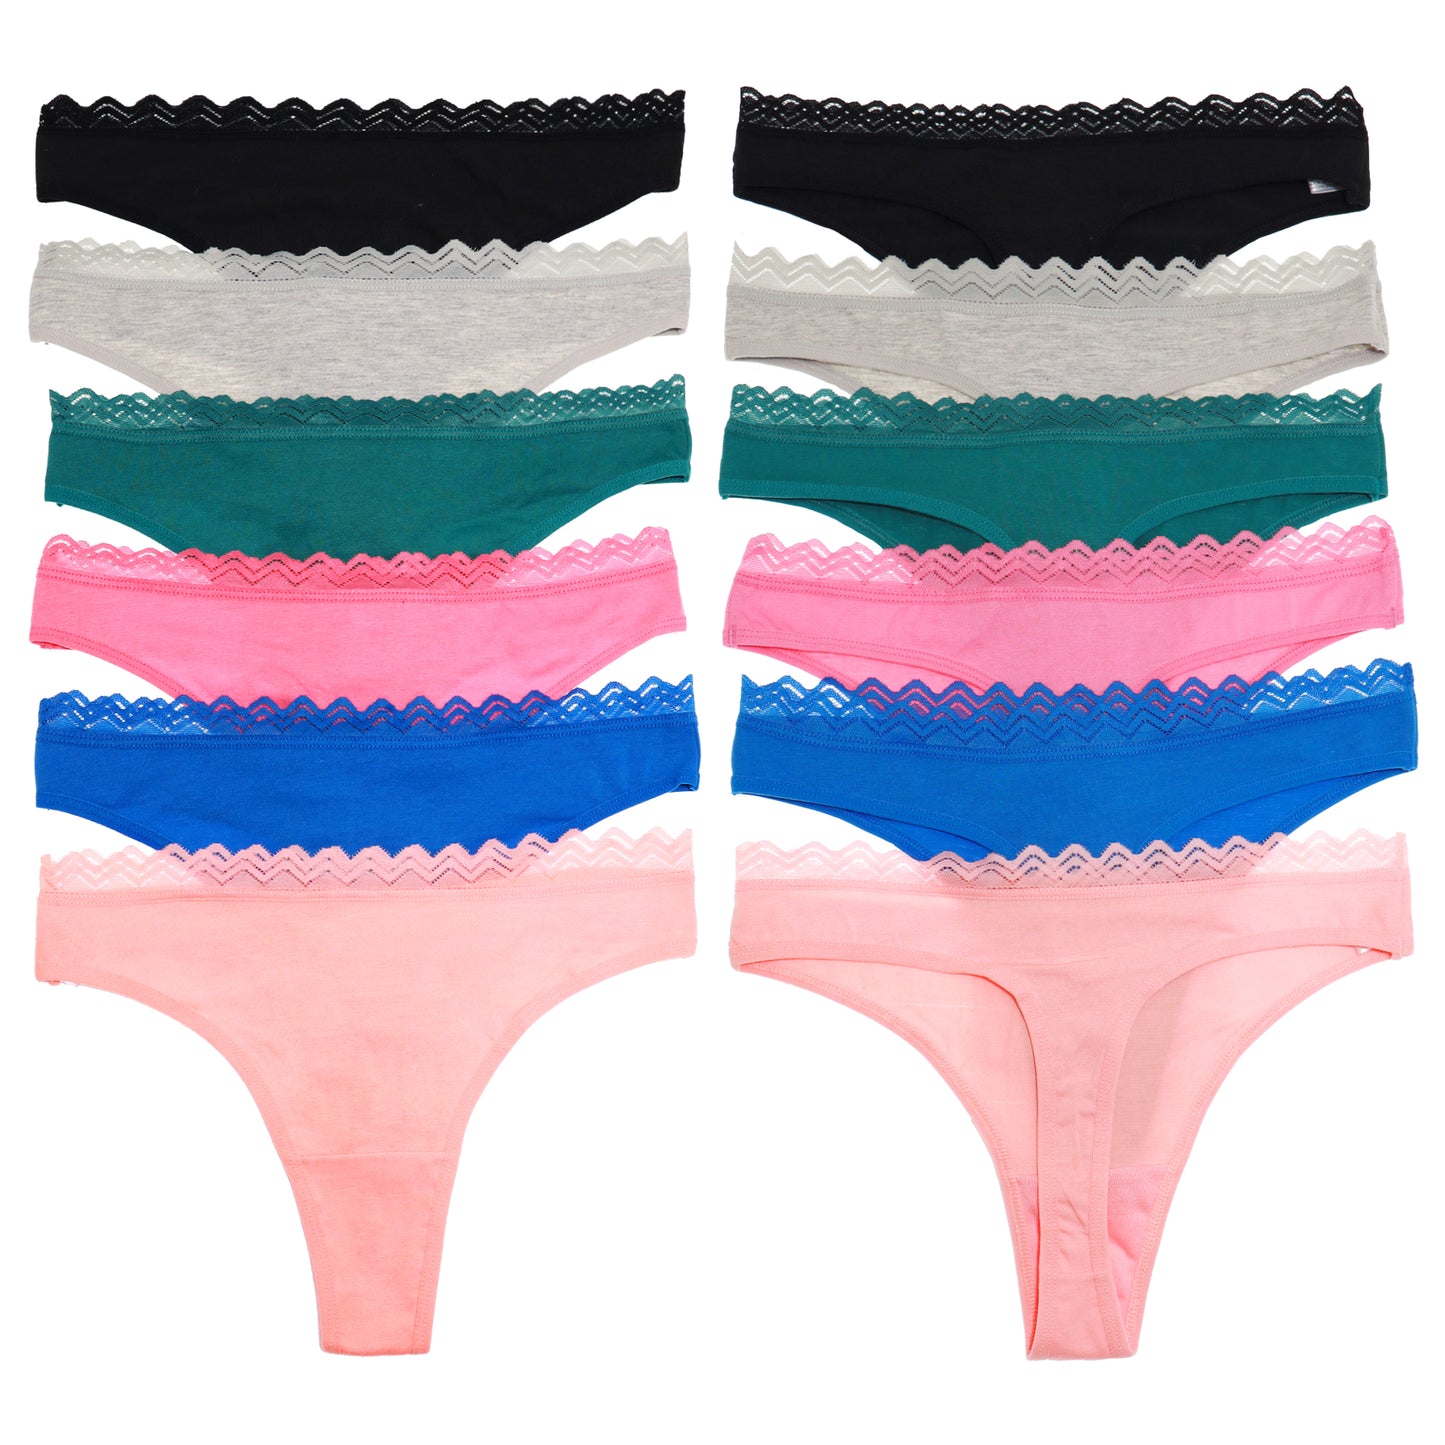 Cotton Thong Panties with Lace Waist (6-Pack)